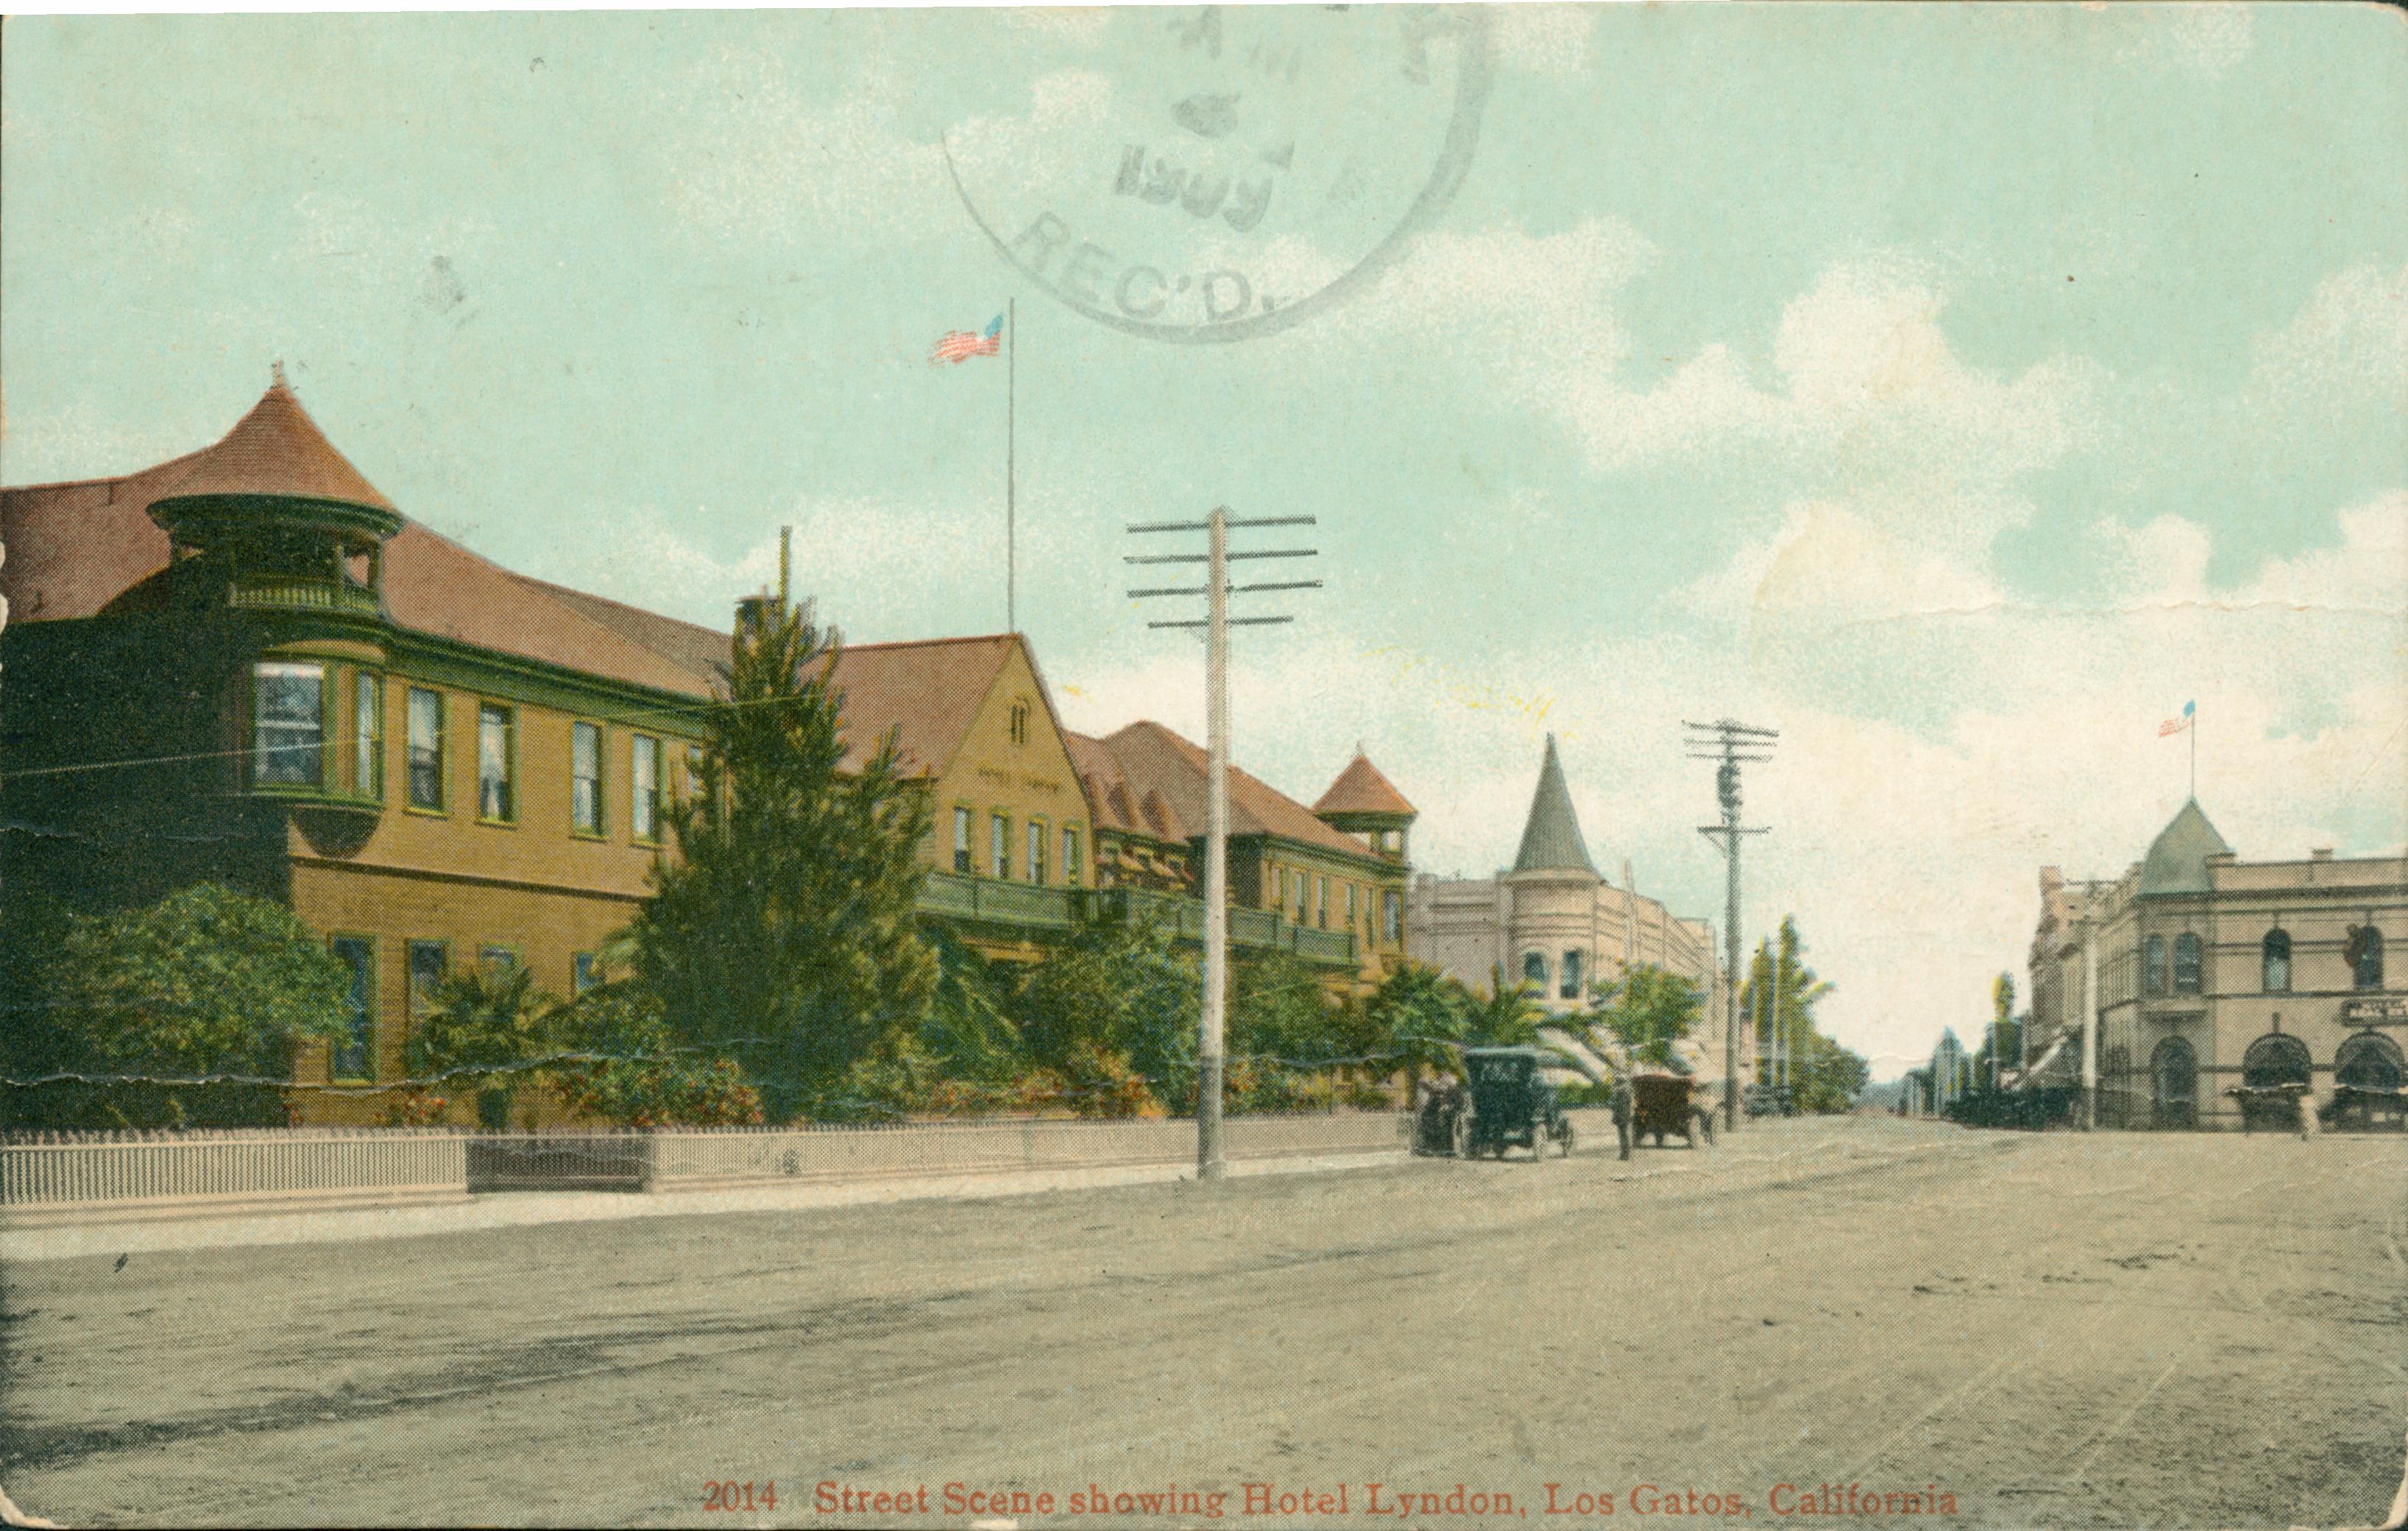 Large buildings with trees and picket fences, large dirt boulevard with automobiles parked on the side. Tall electric poles on side of road, flag flying from atop building